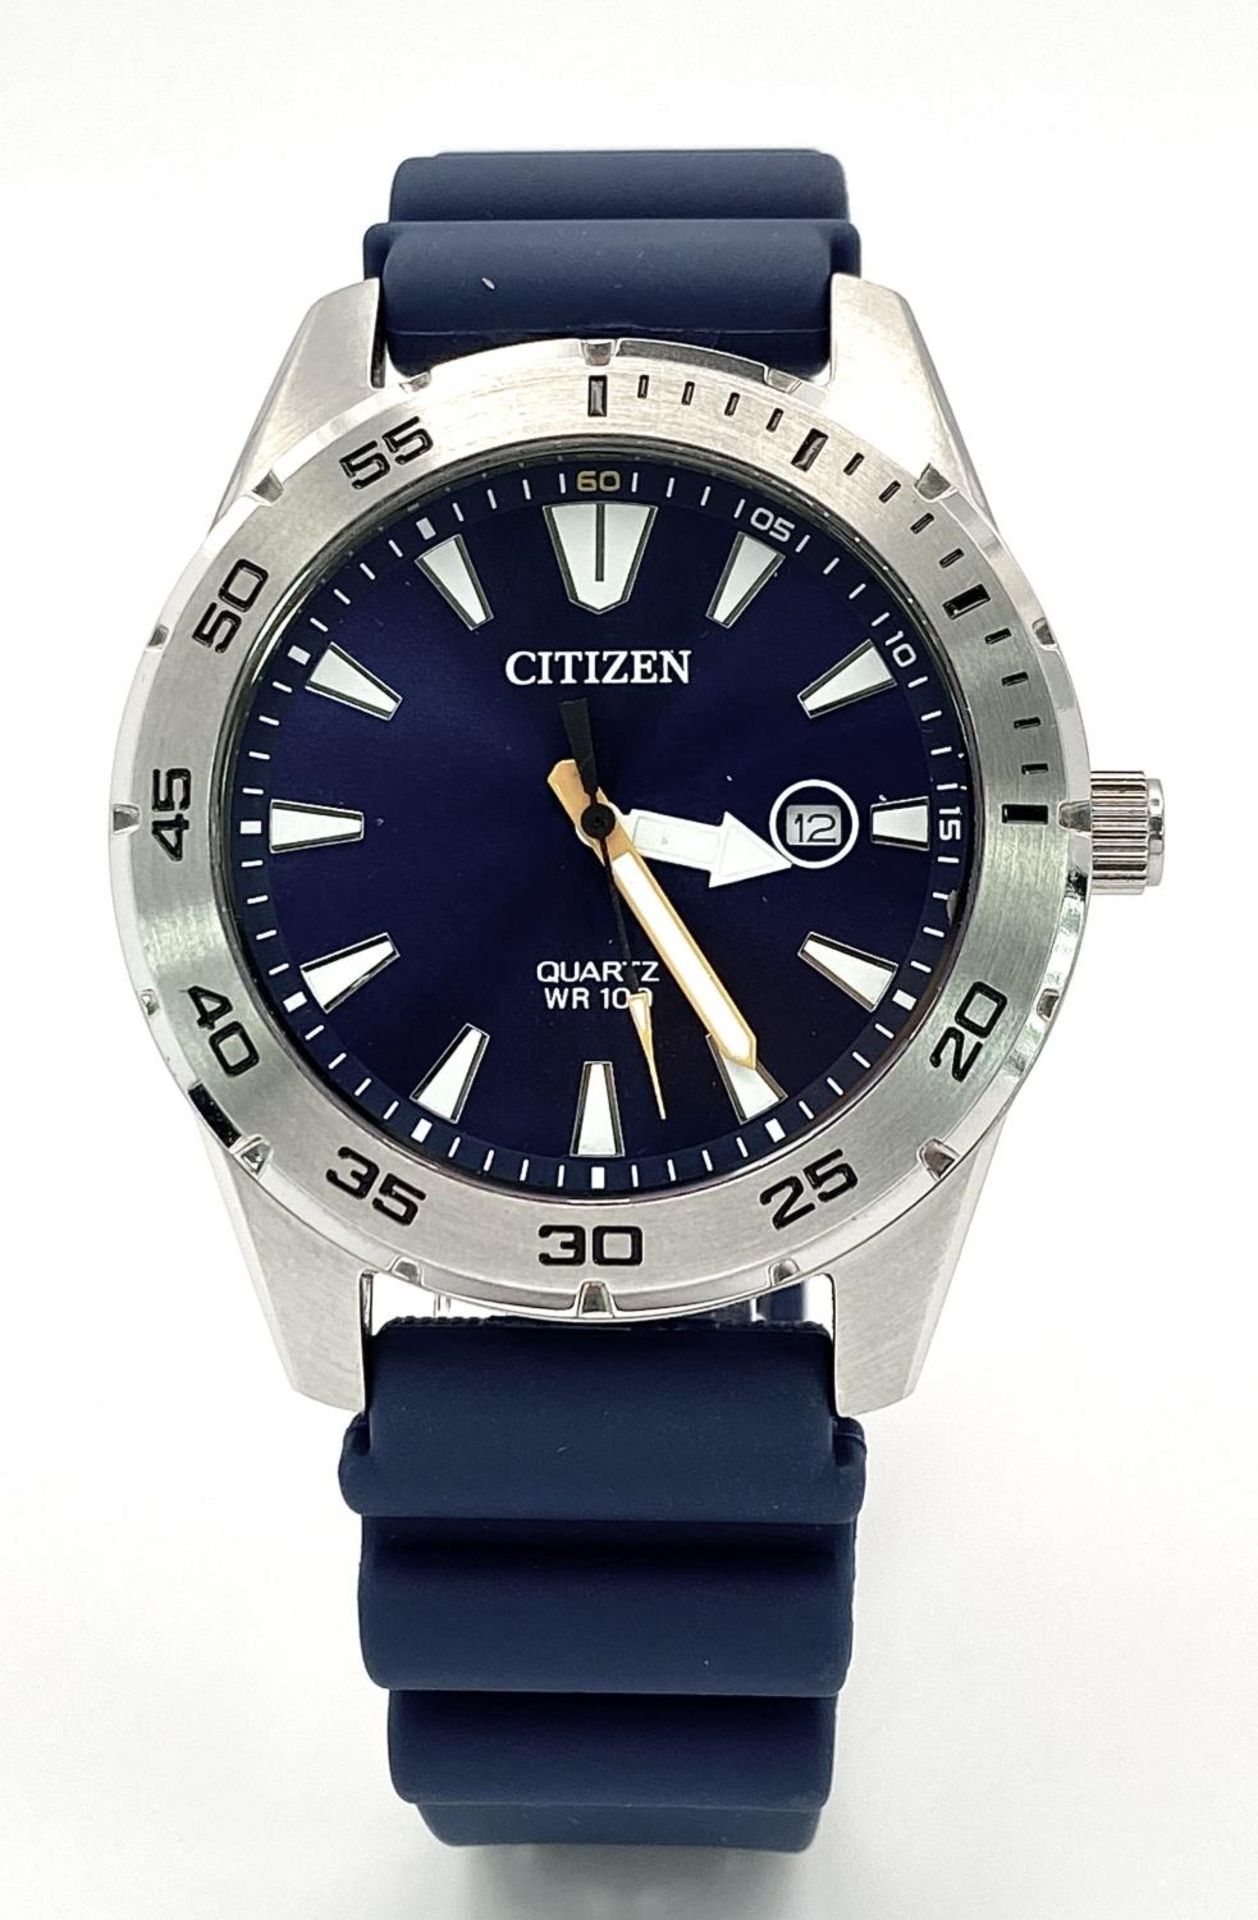 A Citizen Quartz Gents Watch. Blue rubber strap. Stainless steel case - 42mm. Blue dial with date - Image 3 of 6